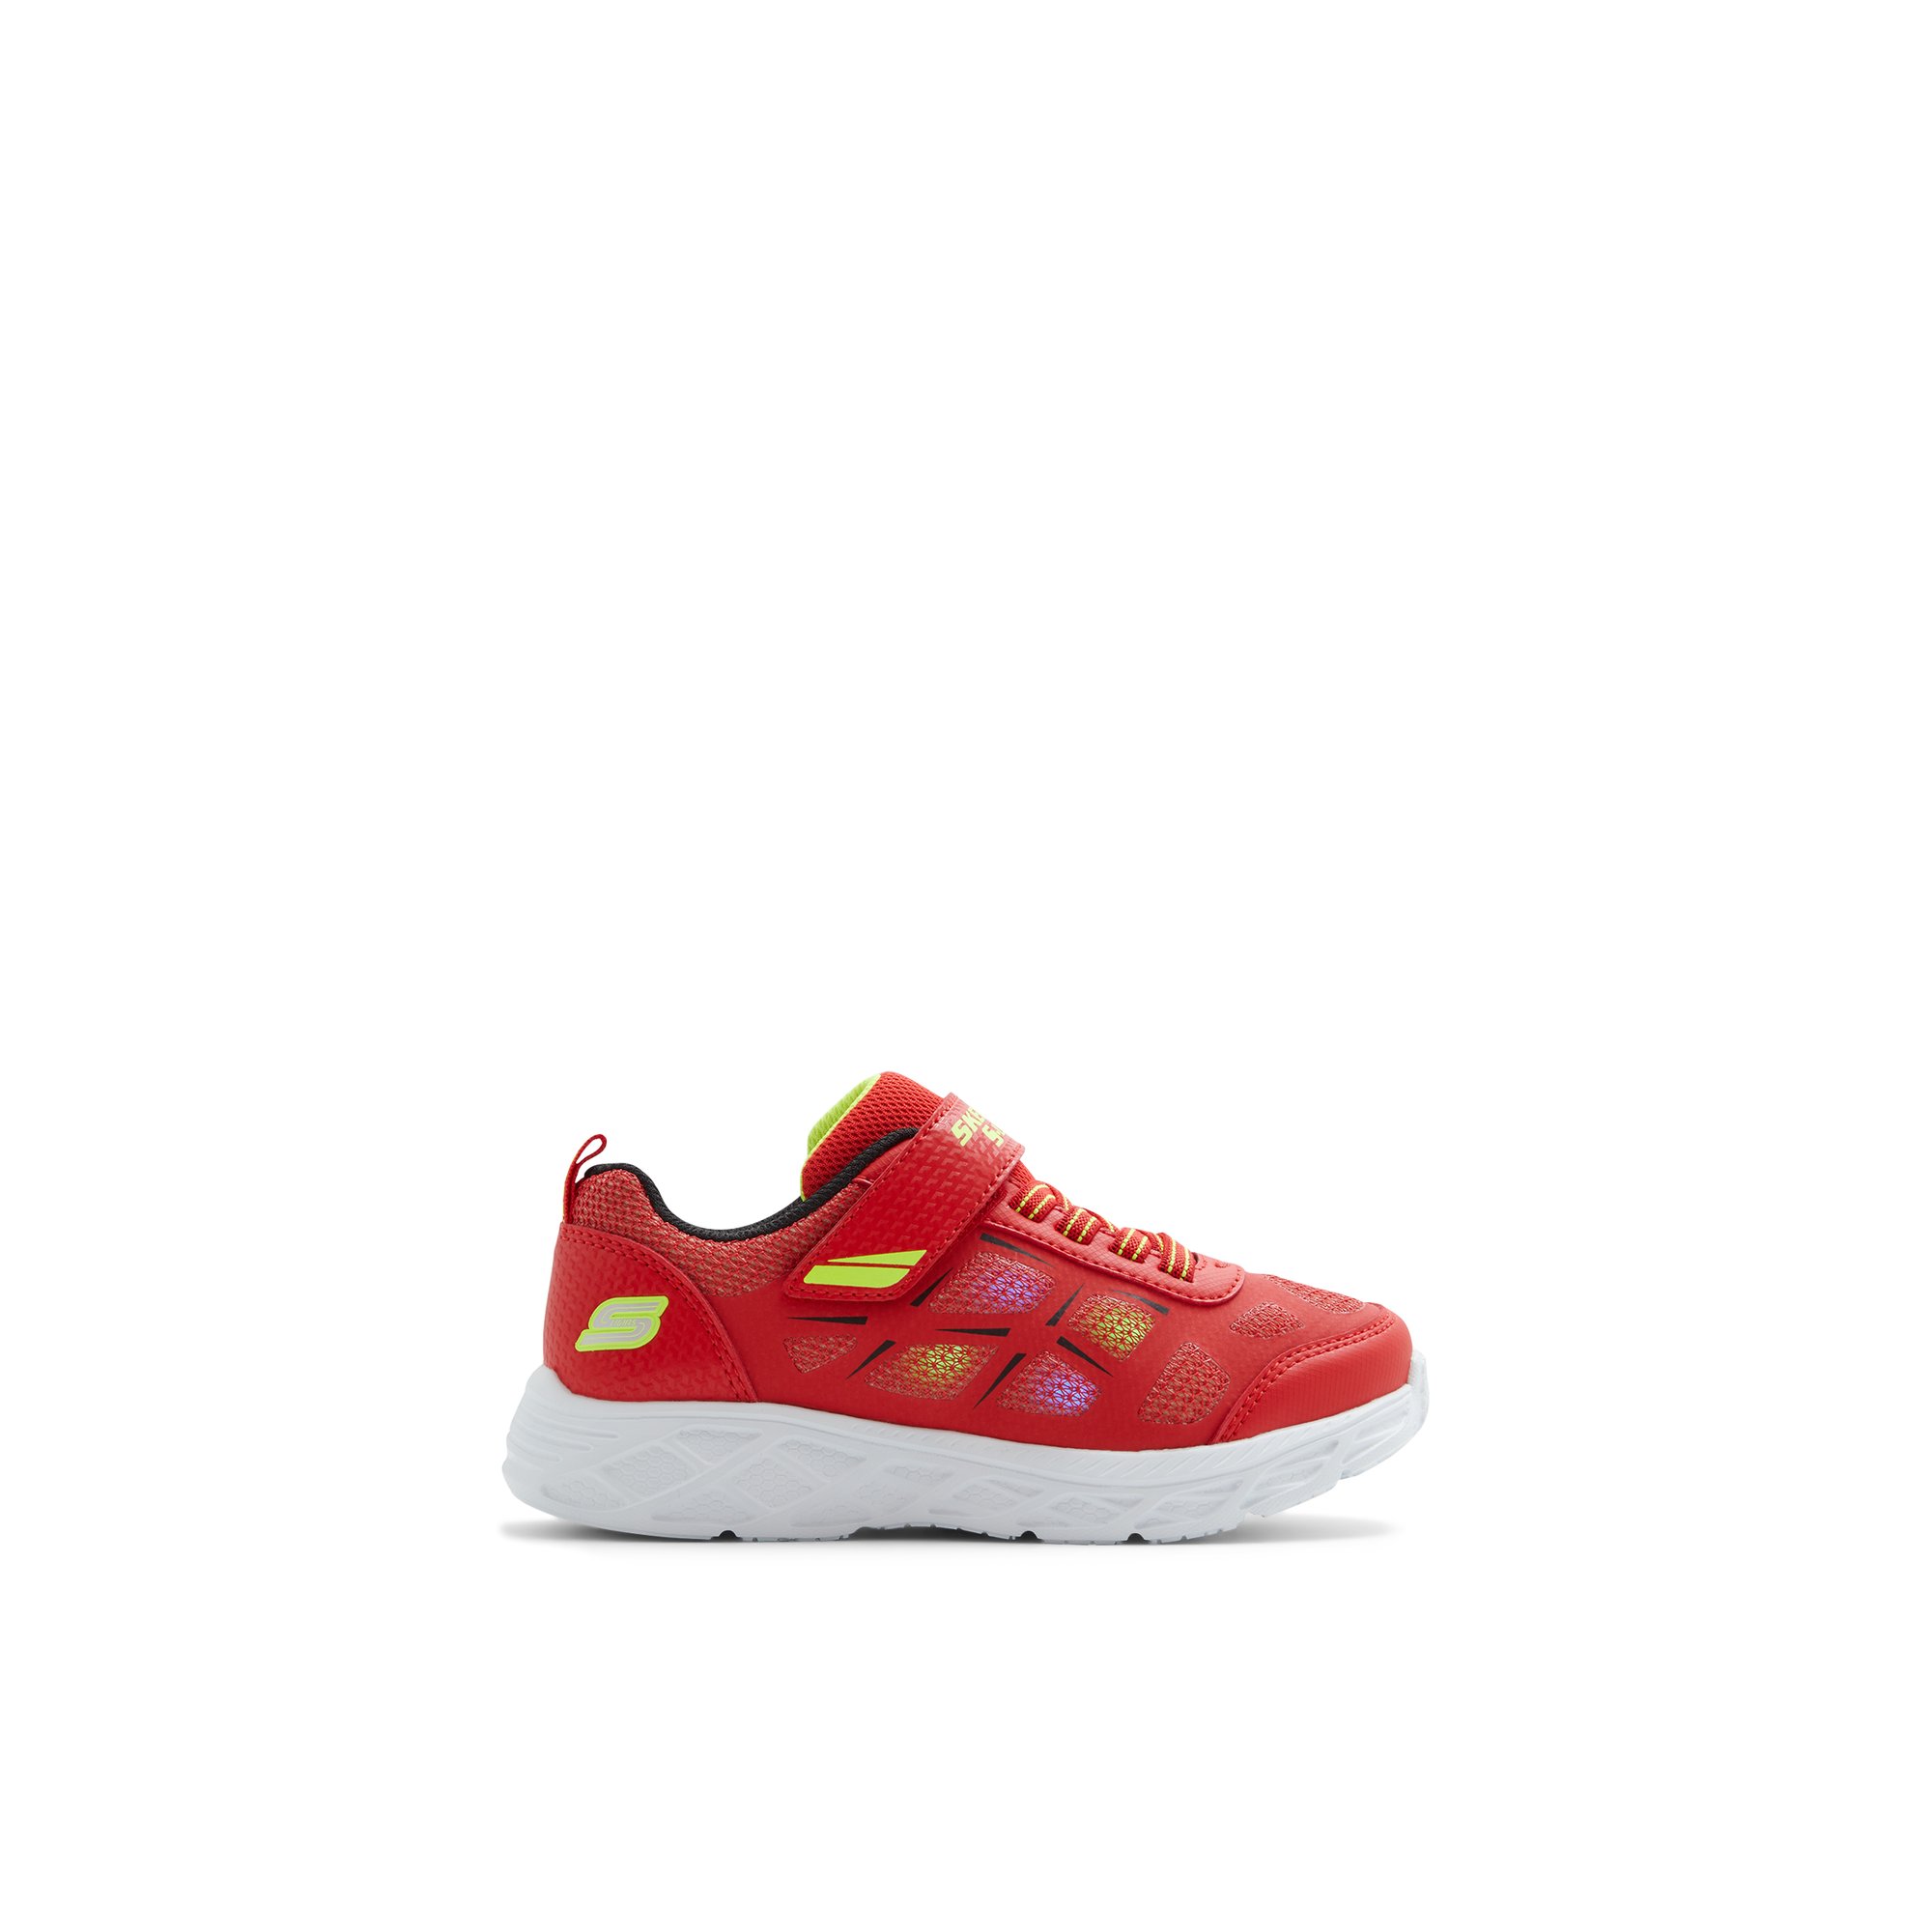 Skechers Dyna Flsh-jb - Kids Easy On Boys Shoes - Red (Clothing One-Pieces) photo